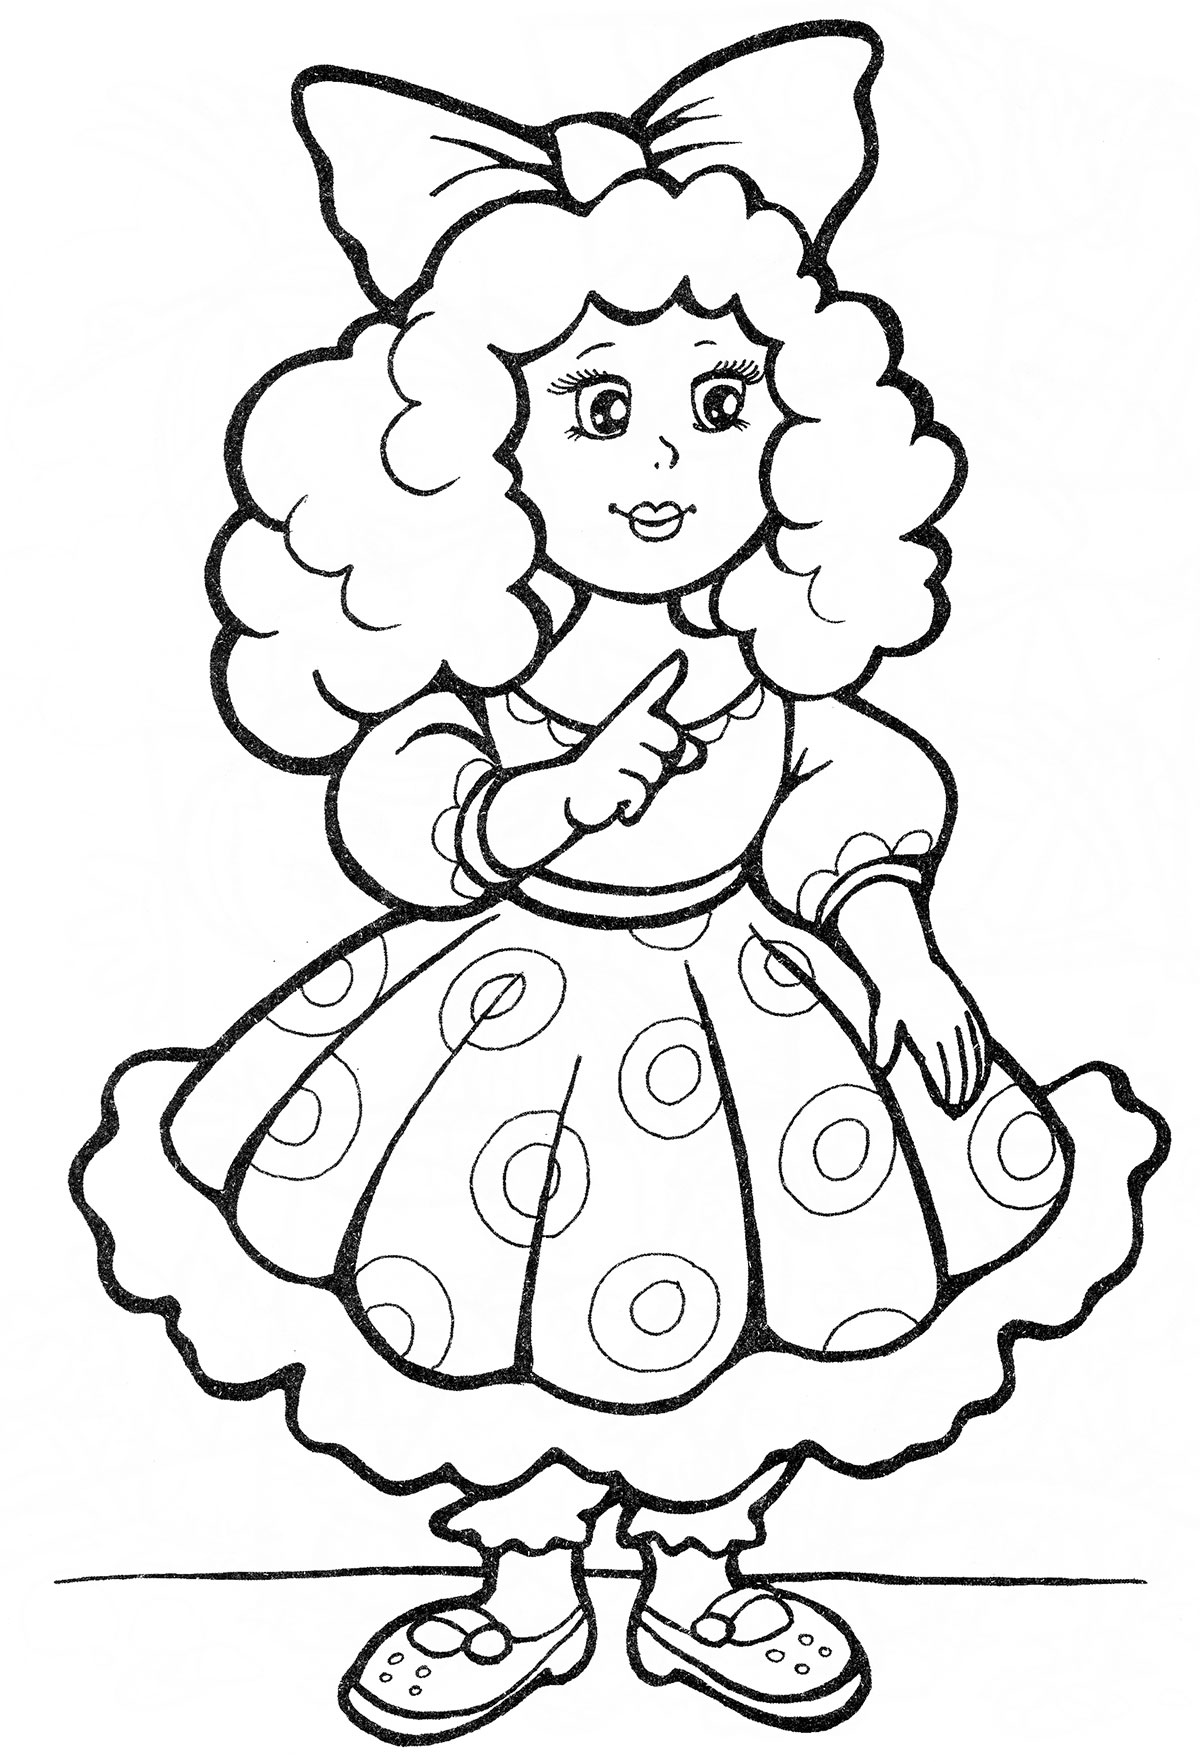 Coloring pages for children of 45 years to download and